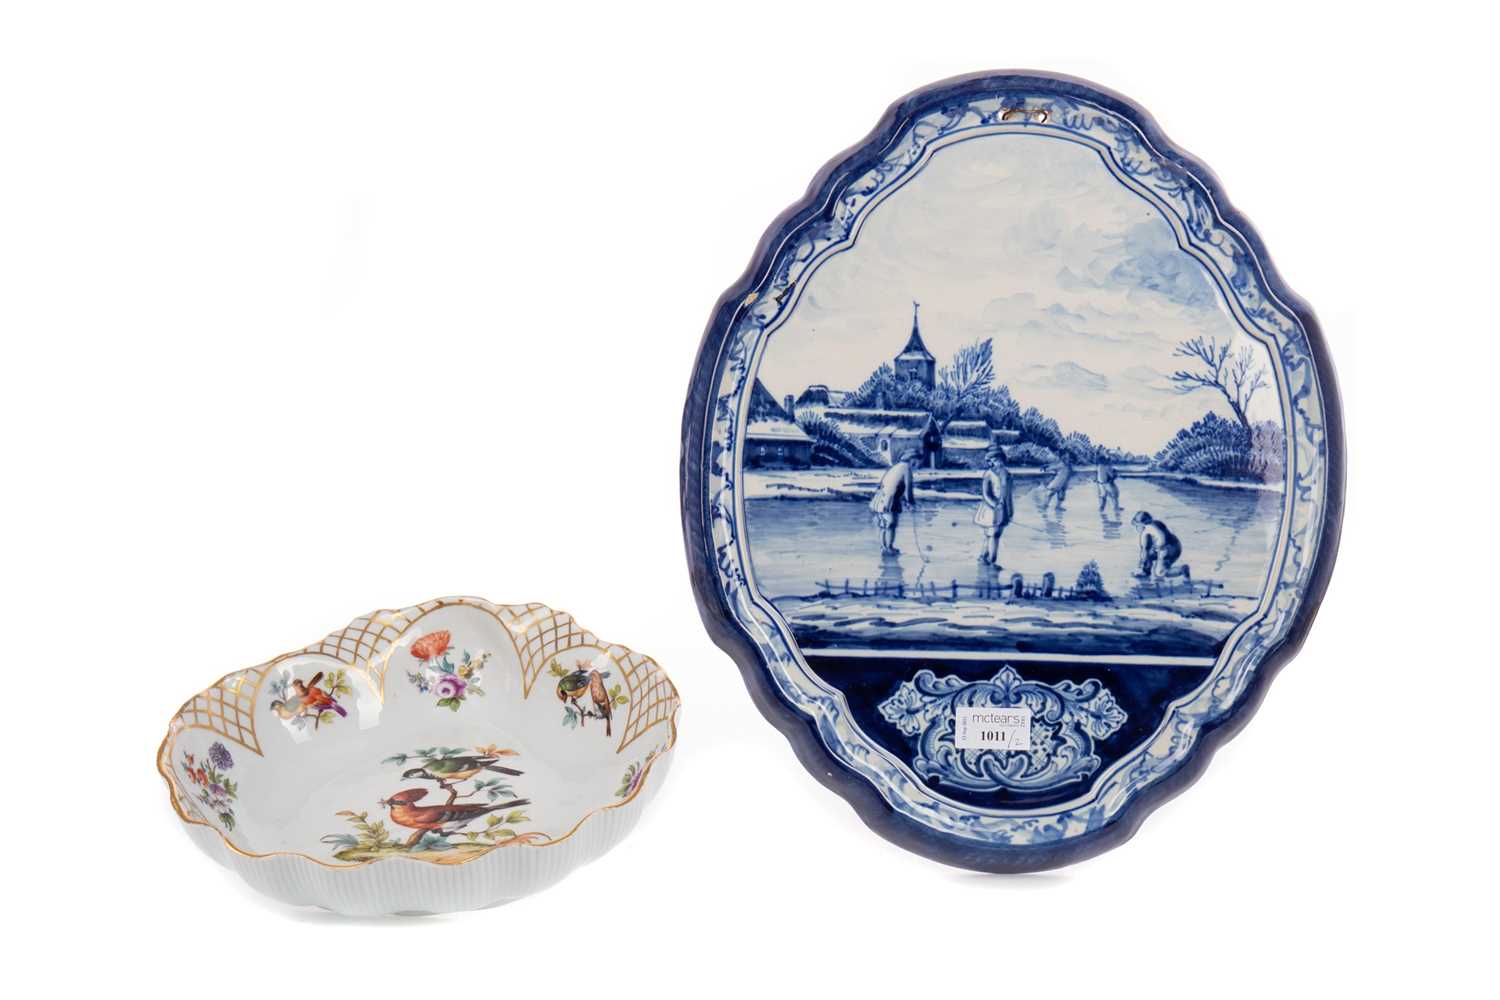 Lot 1011 - A DUTCH BLUE & WHITE OVAL SHAPED WALL PLAQUE AND A MEISSEN STYLE DISH